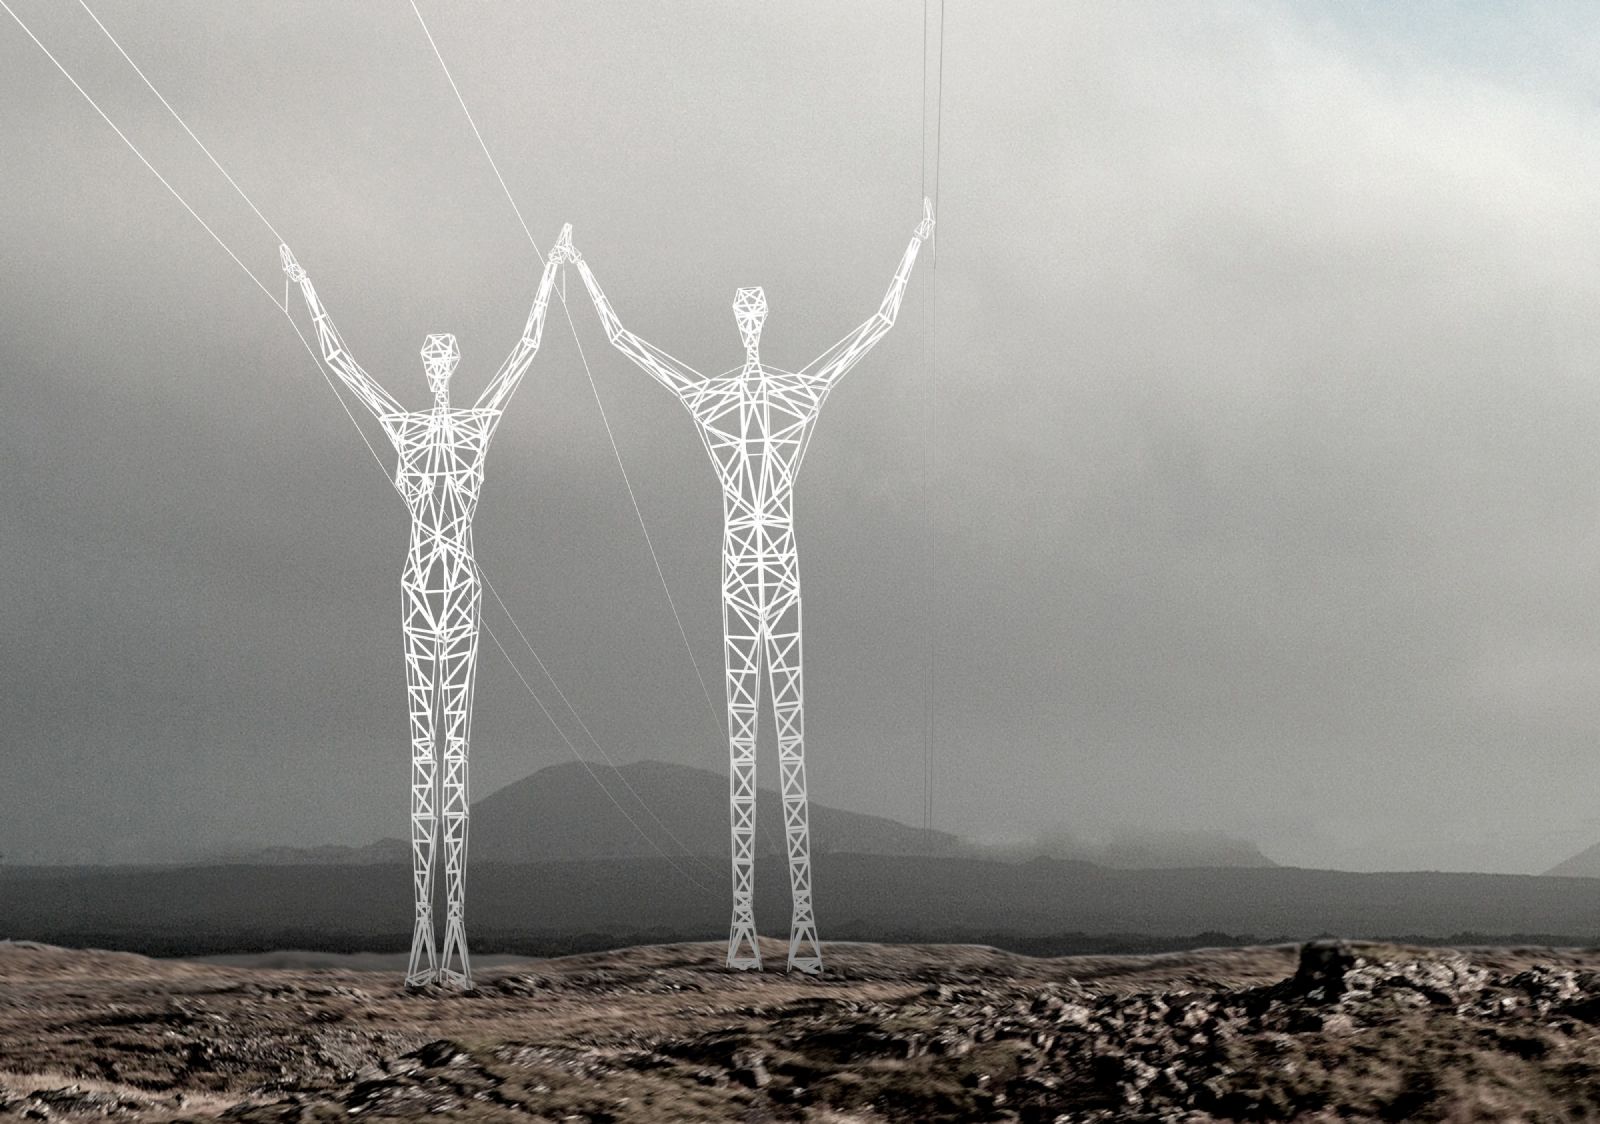 The Land of the Giants  Electrical pylons transformed into statues walking along the Icelandic landscape.